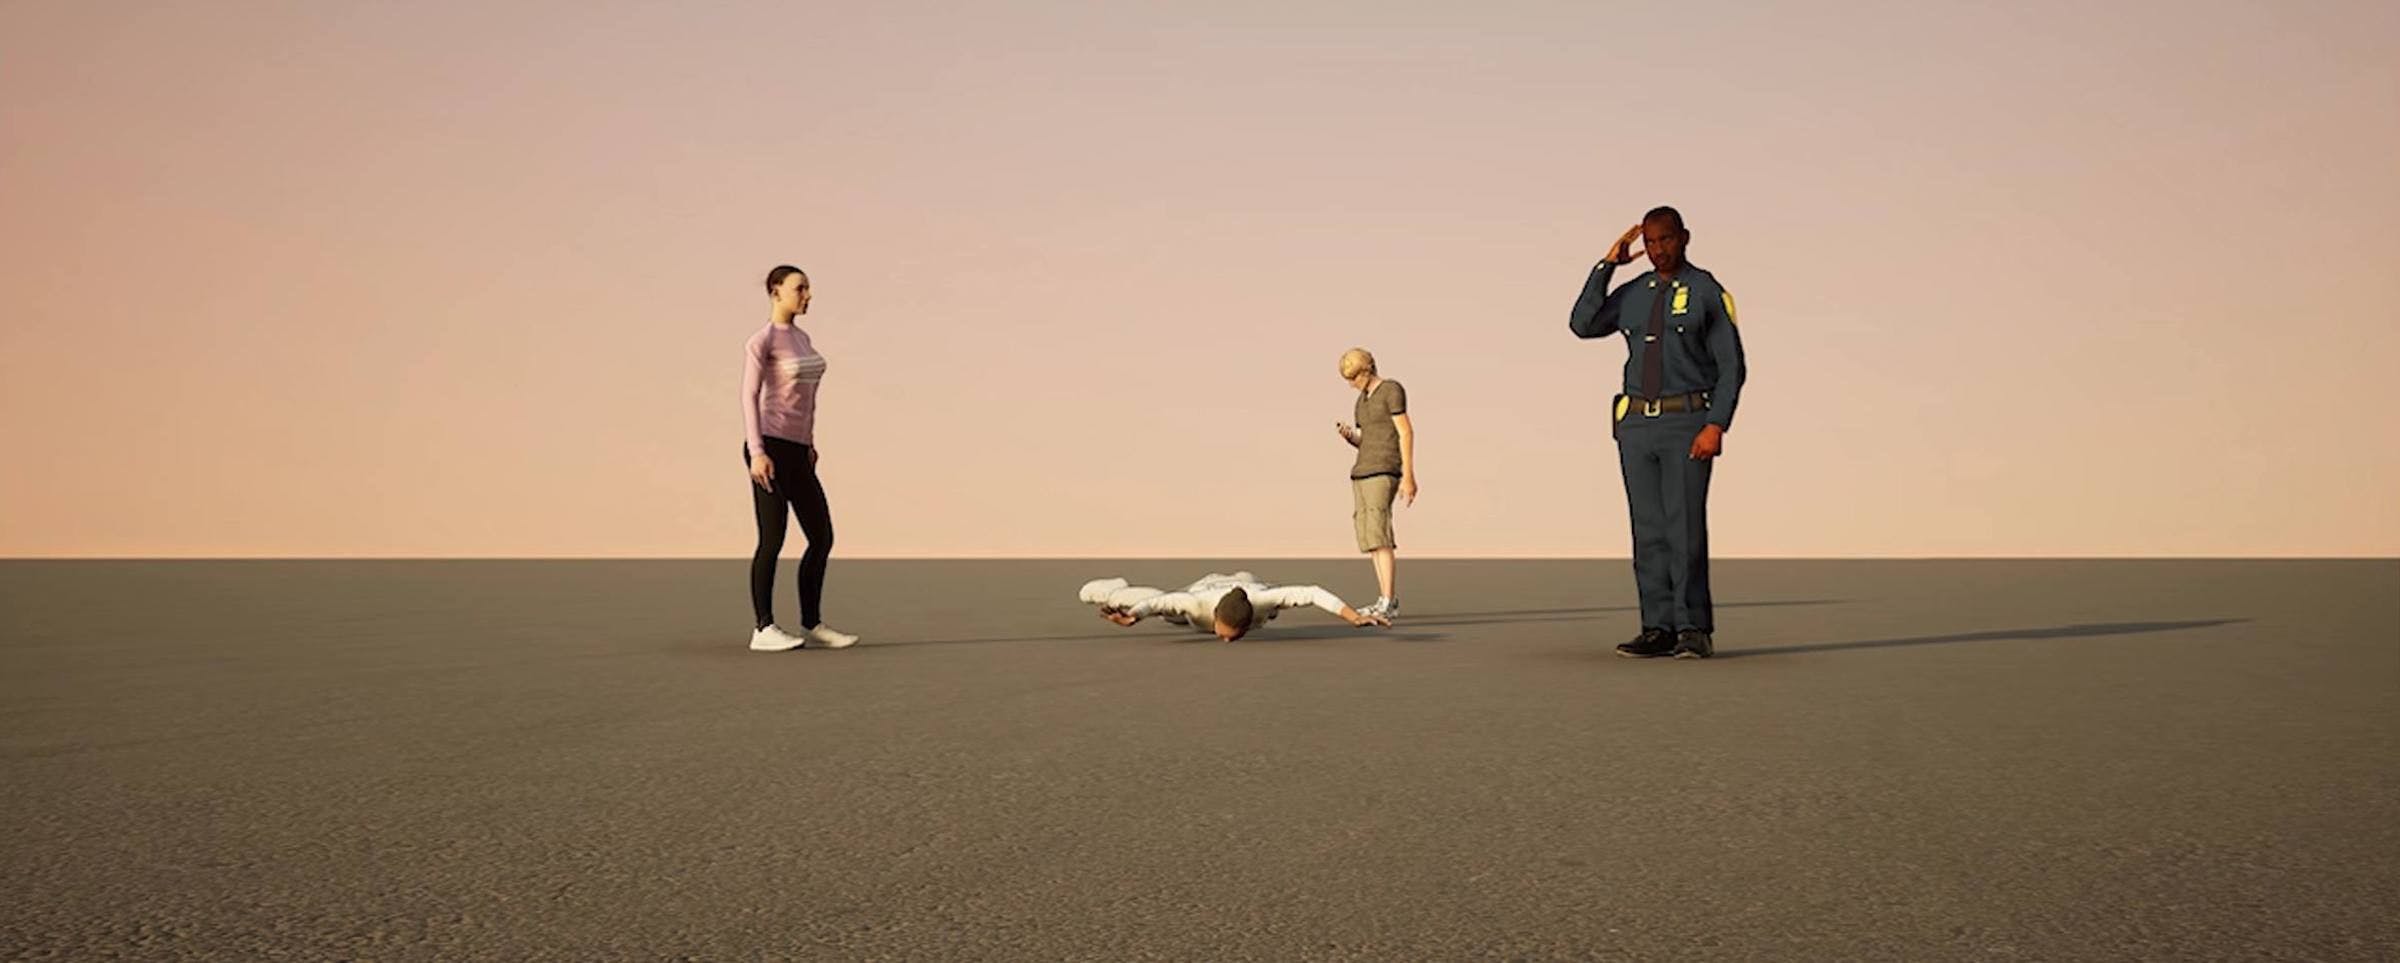 Computer-generated image of four figures in a blank space. One person lies flat on the tarmac and the other three people look on. One of the people standing up is dressed as a police officer.